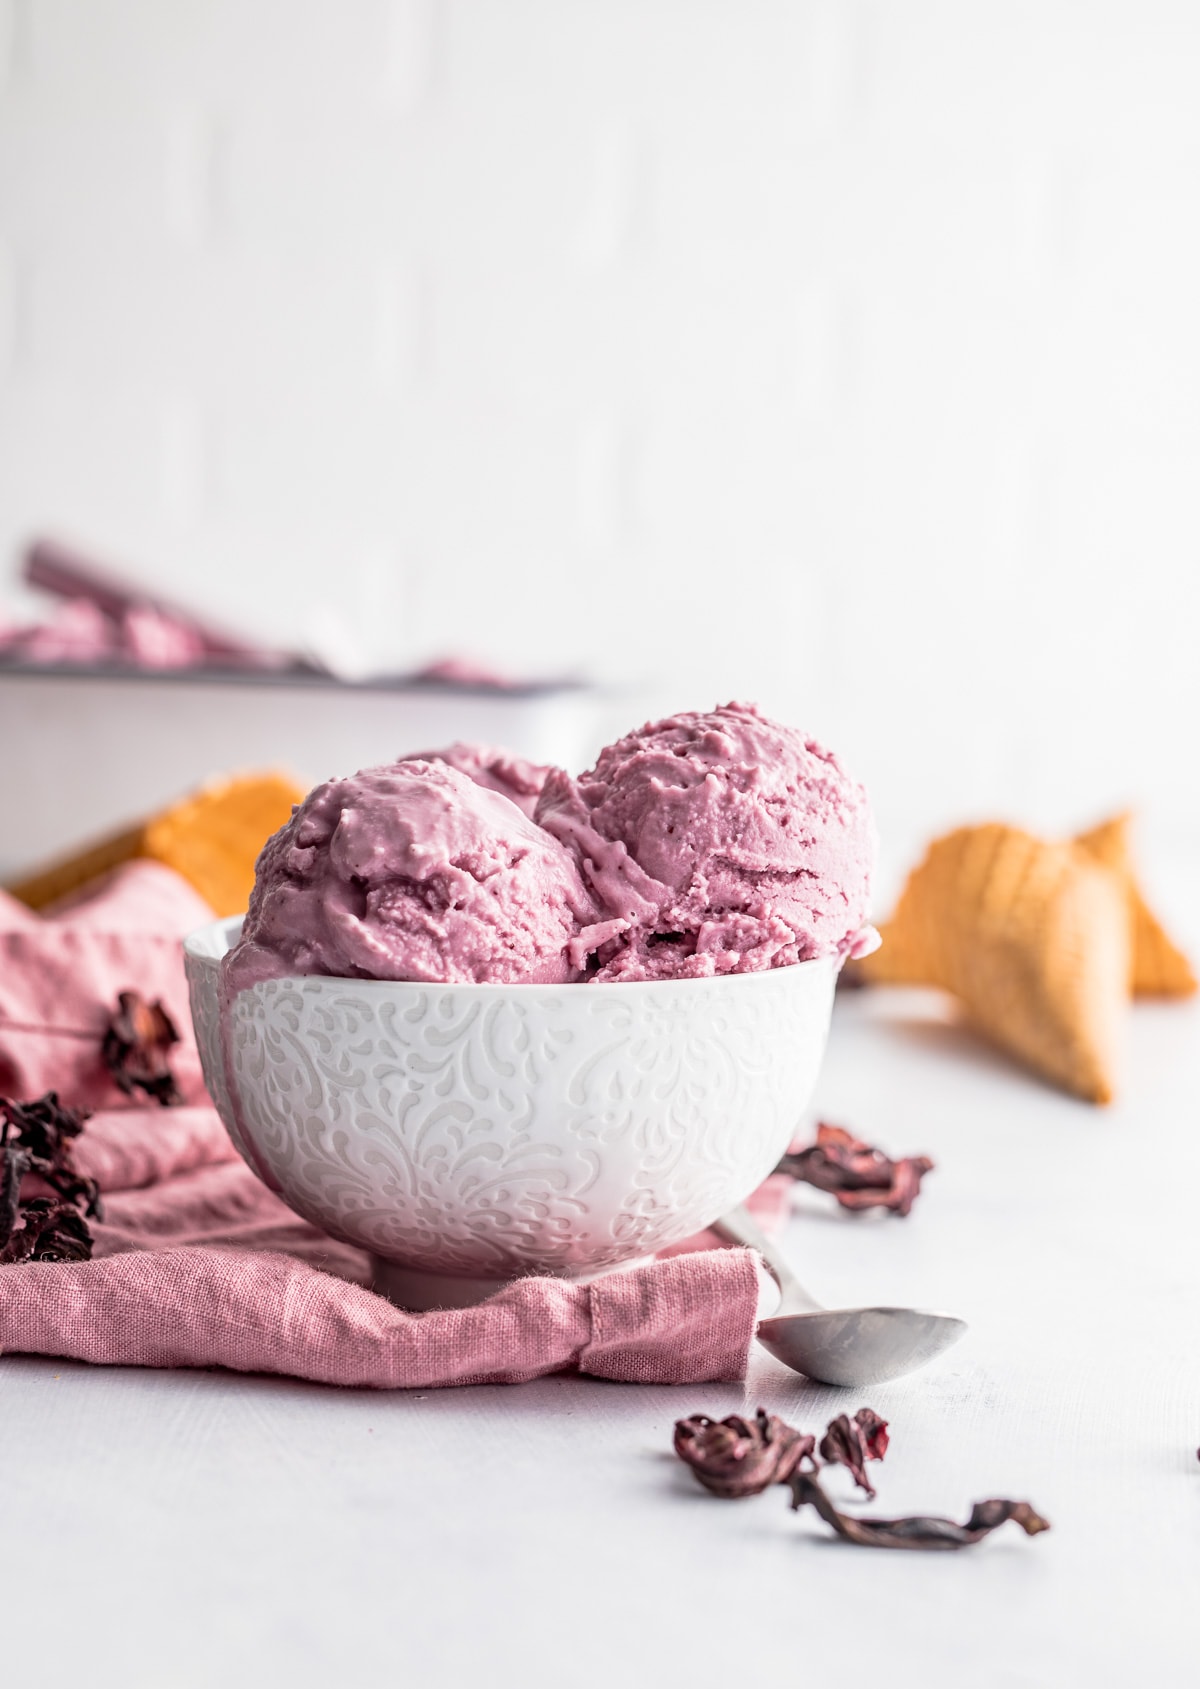 scoops of pink ice cream in a white bowl on a pink napkin scattered hibiscus flowers